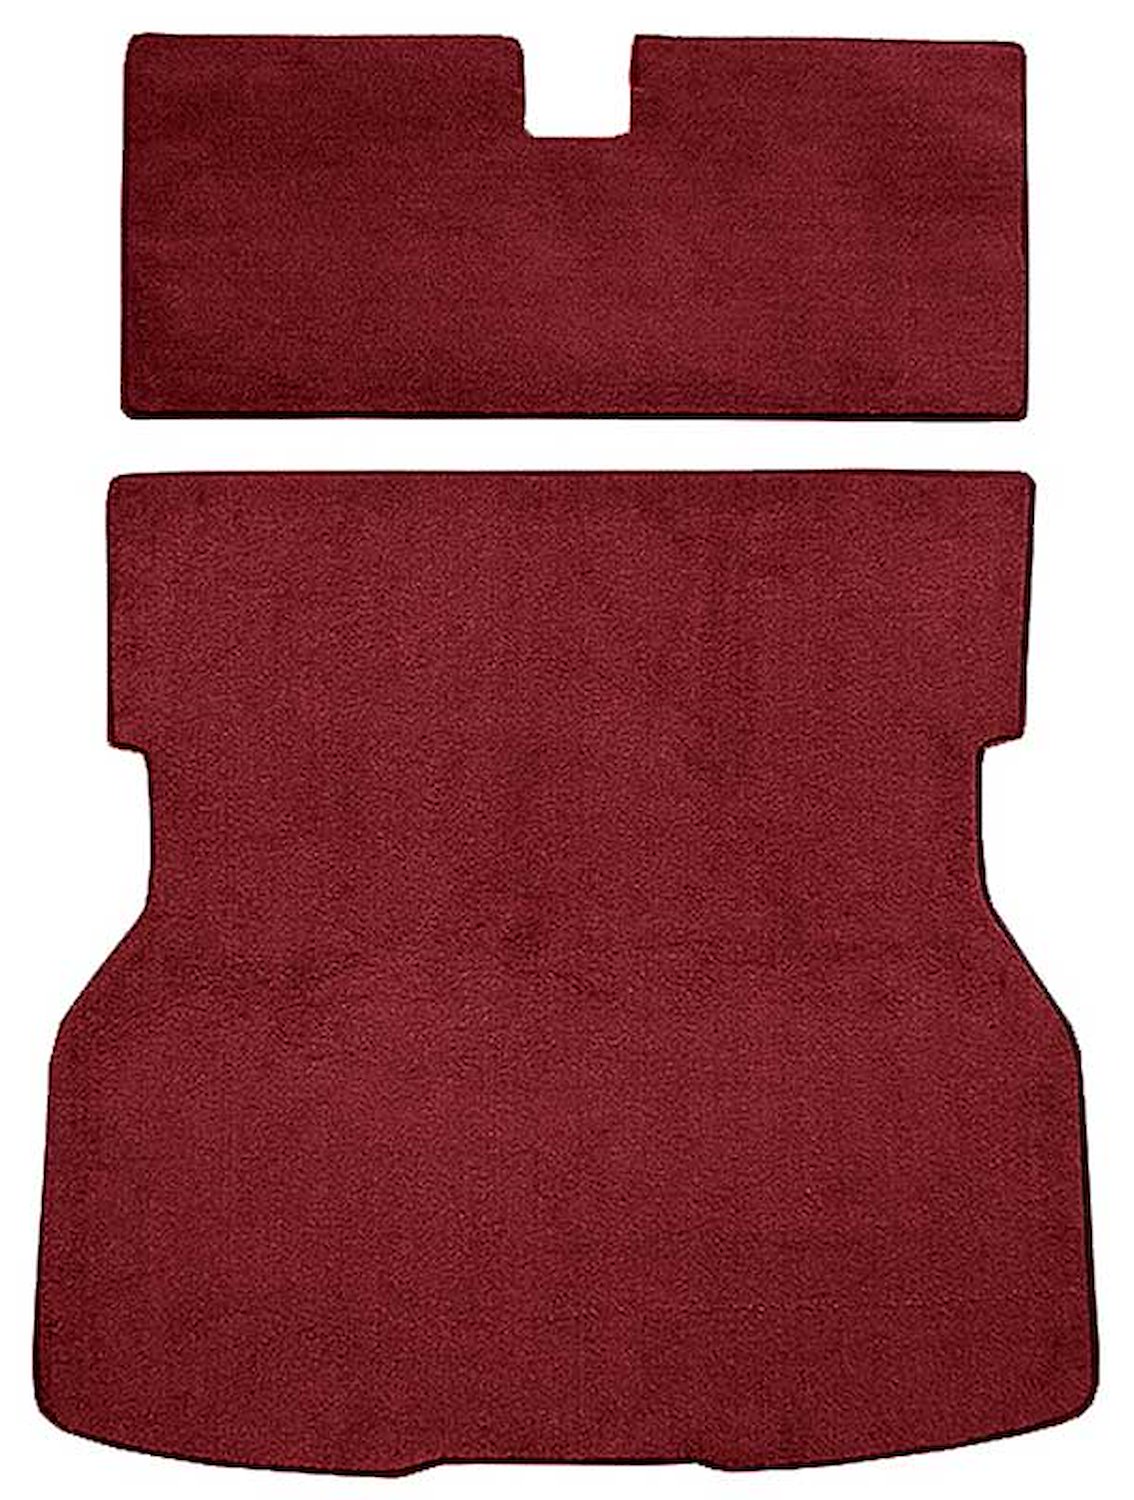 A4021B02 Rear Cargo Area Cut Pile Carpet Set With Mass Backing 1979-82 Mustang; Red